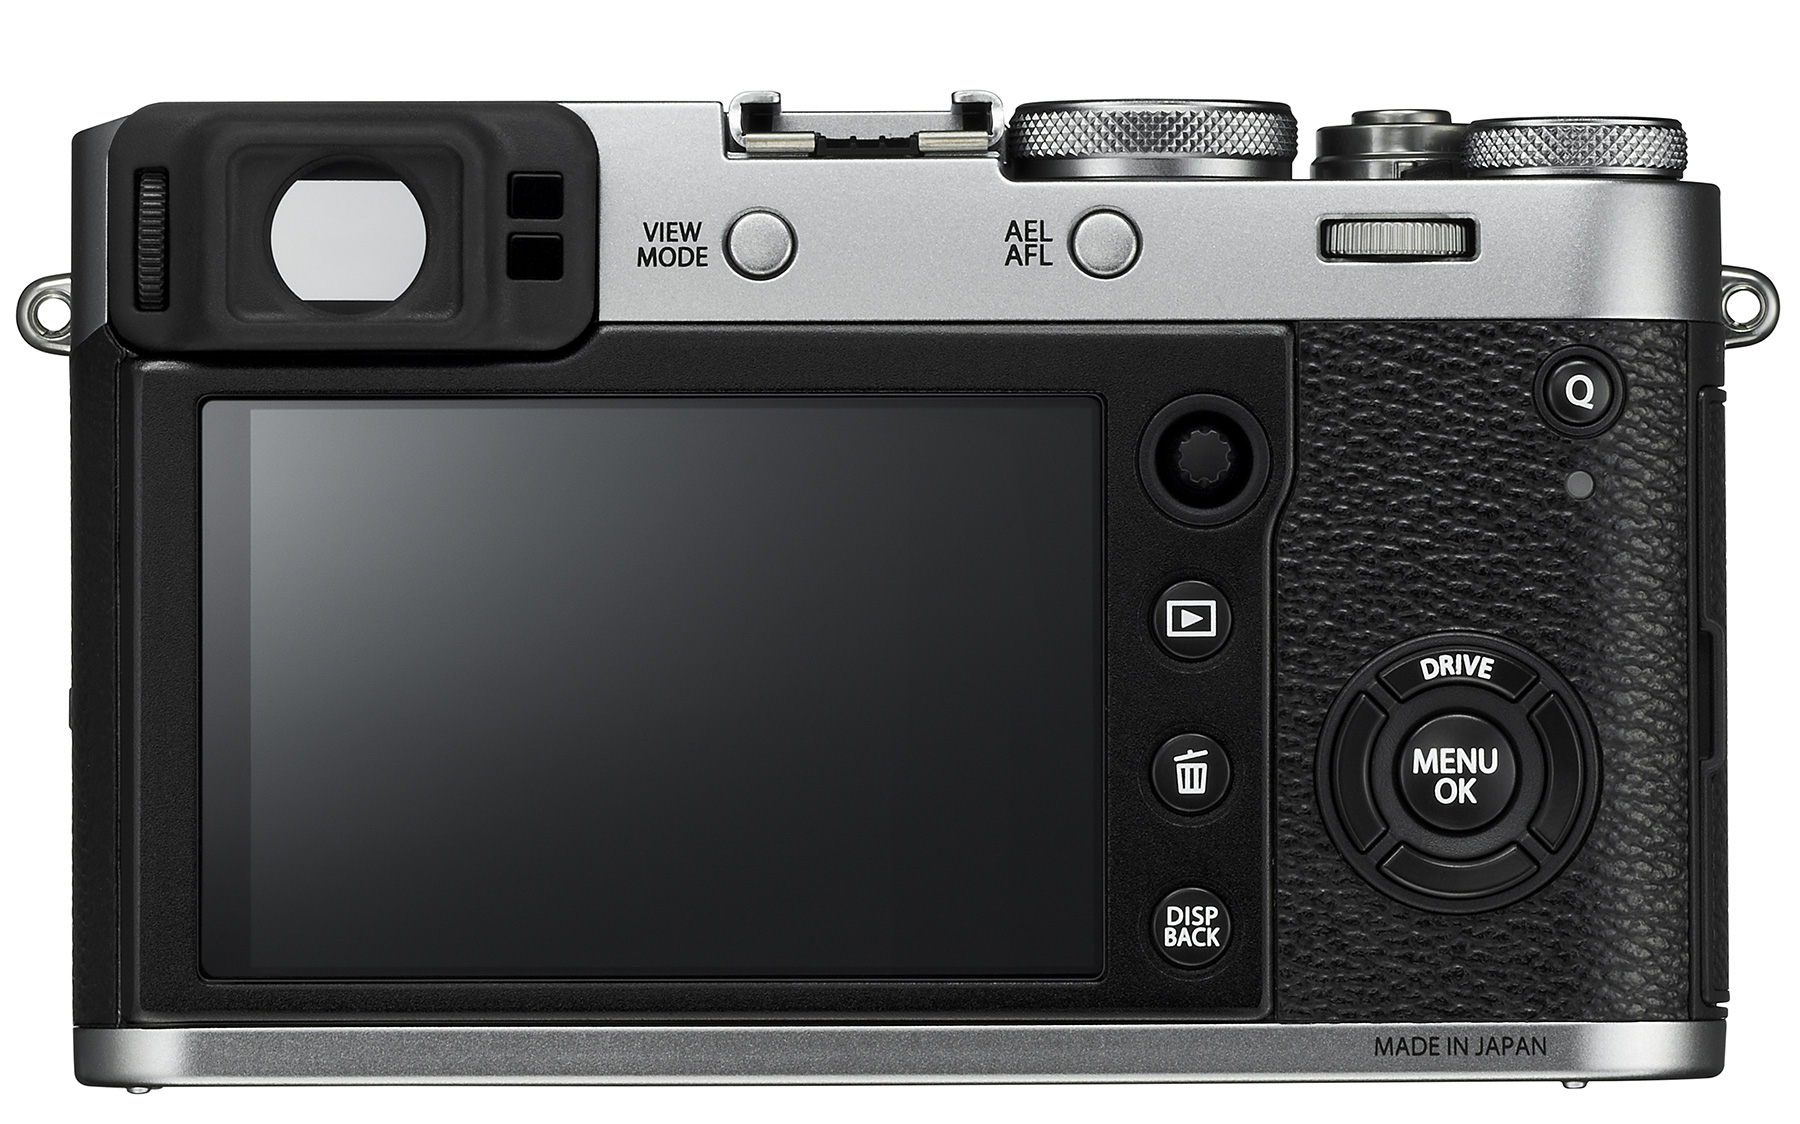 Fujifilm's X100F should be its best fixed-lens camera to date